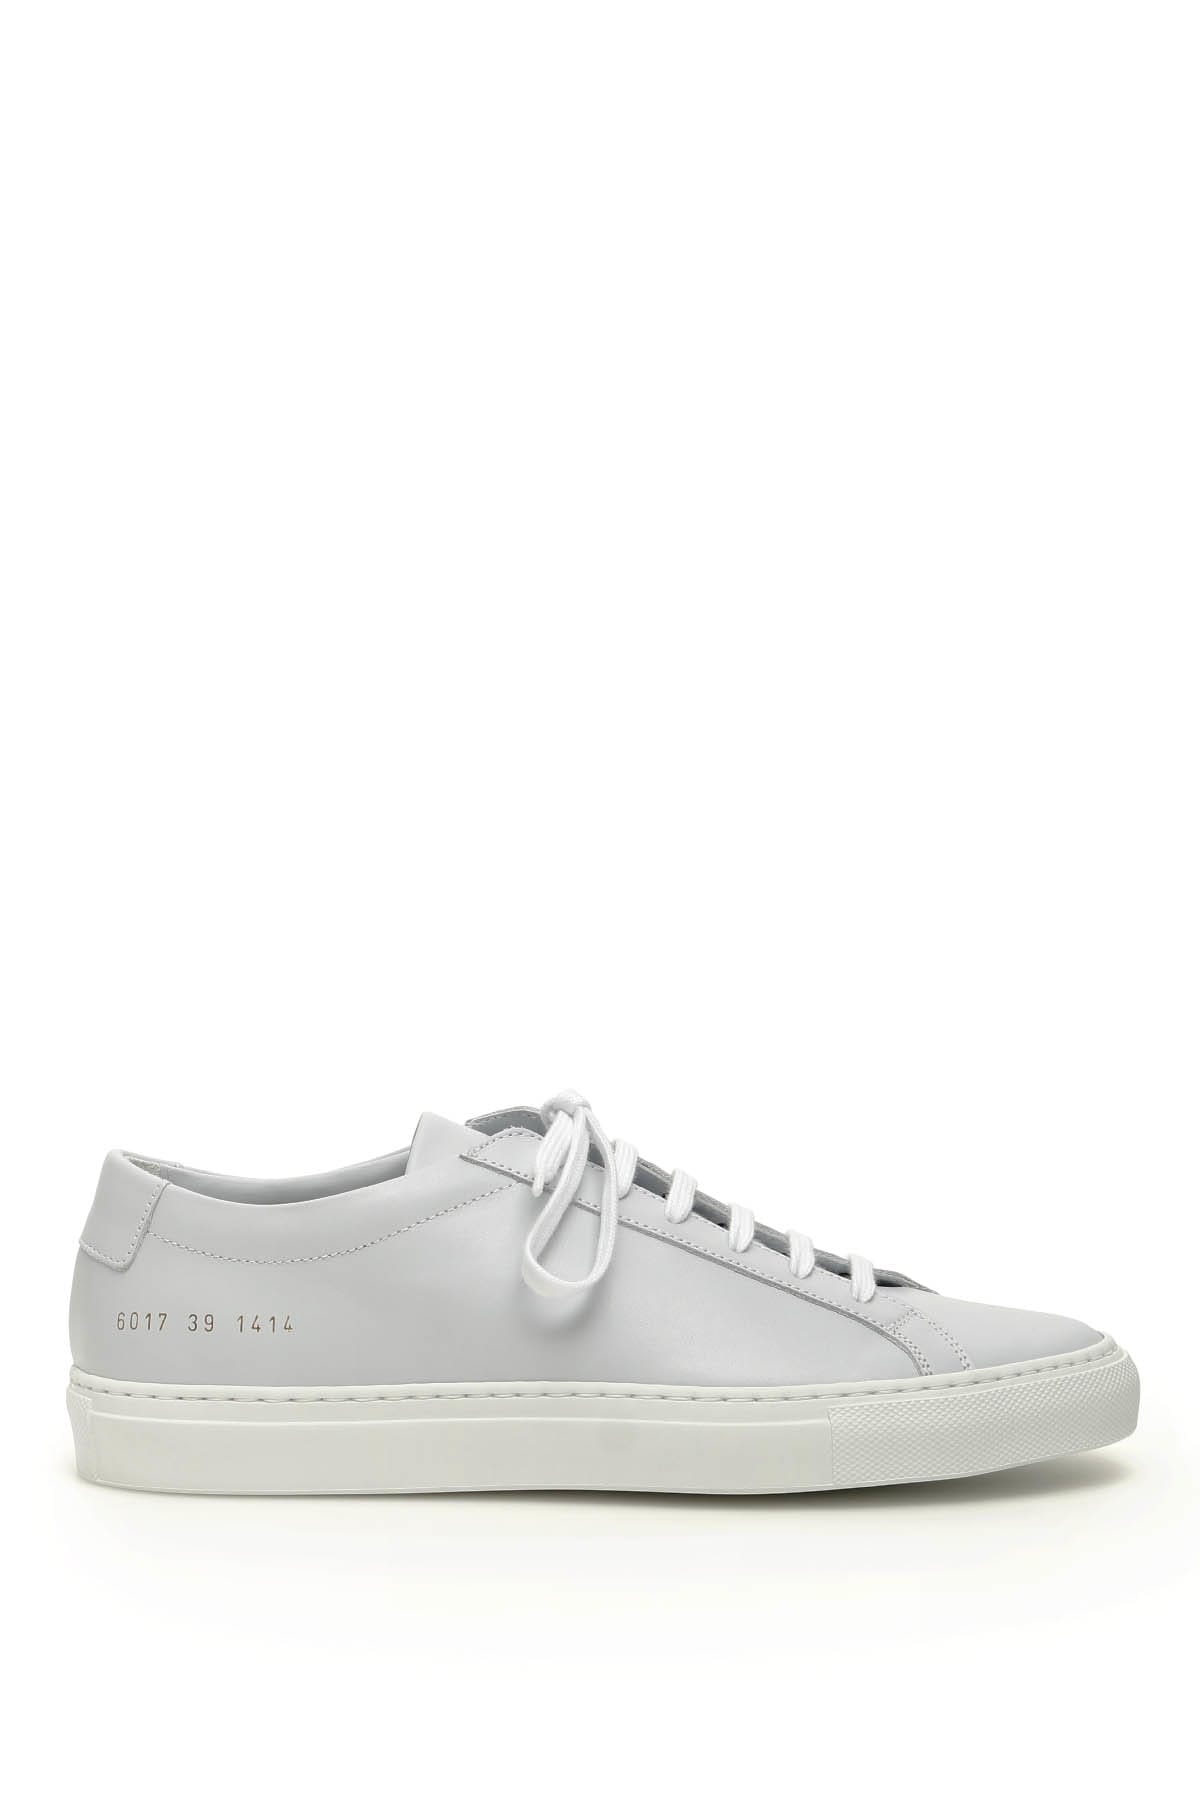 COMMON PROJECTS ORIGINAL ACHILLES SNEAKERS,11244816